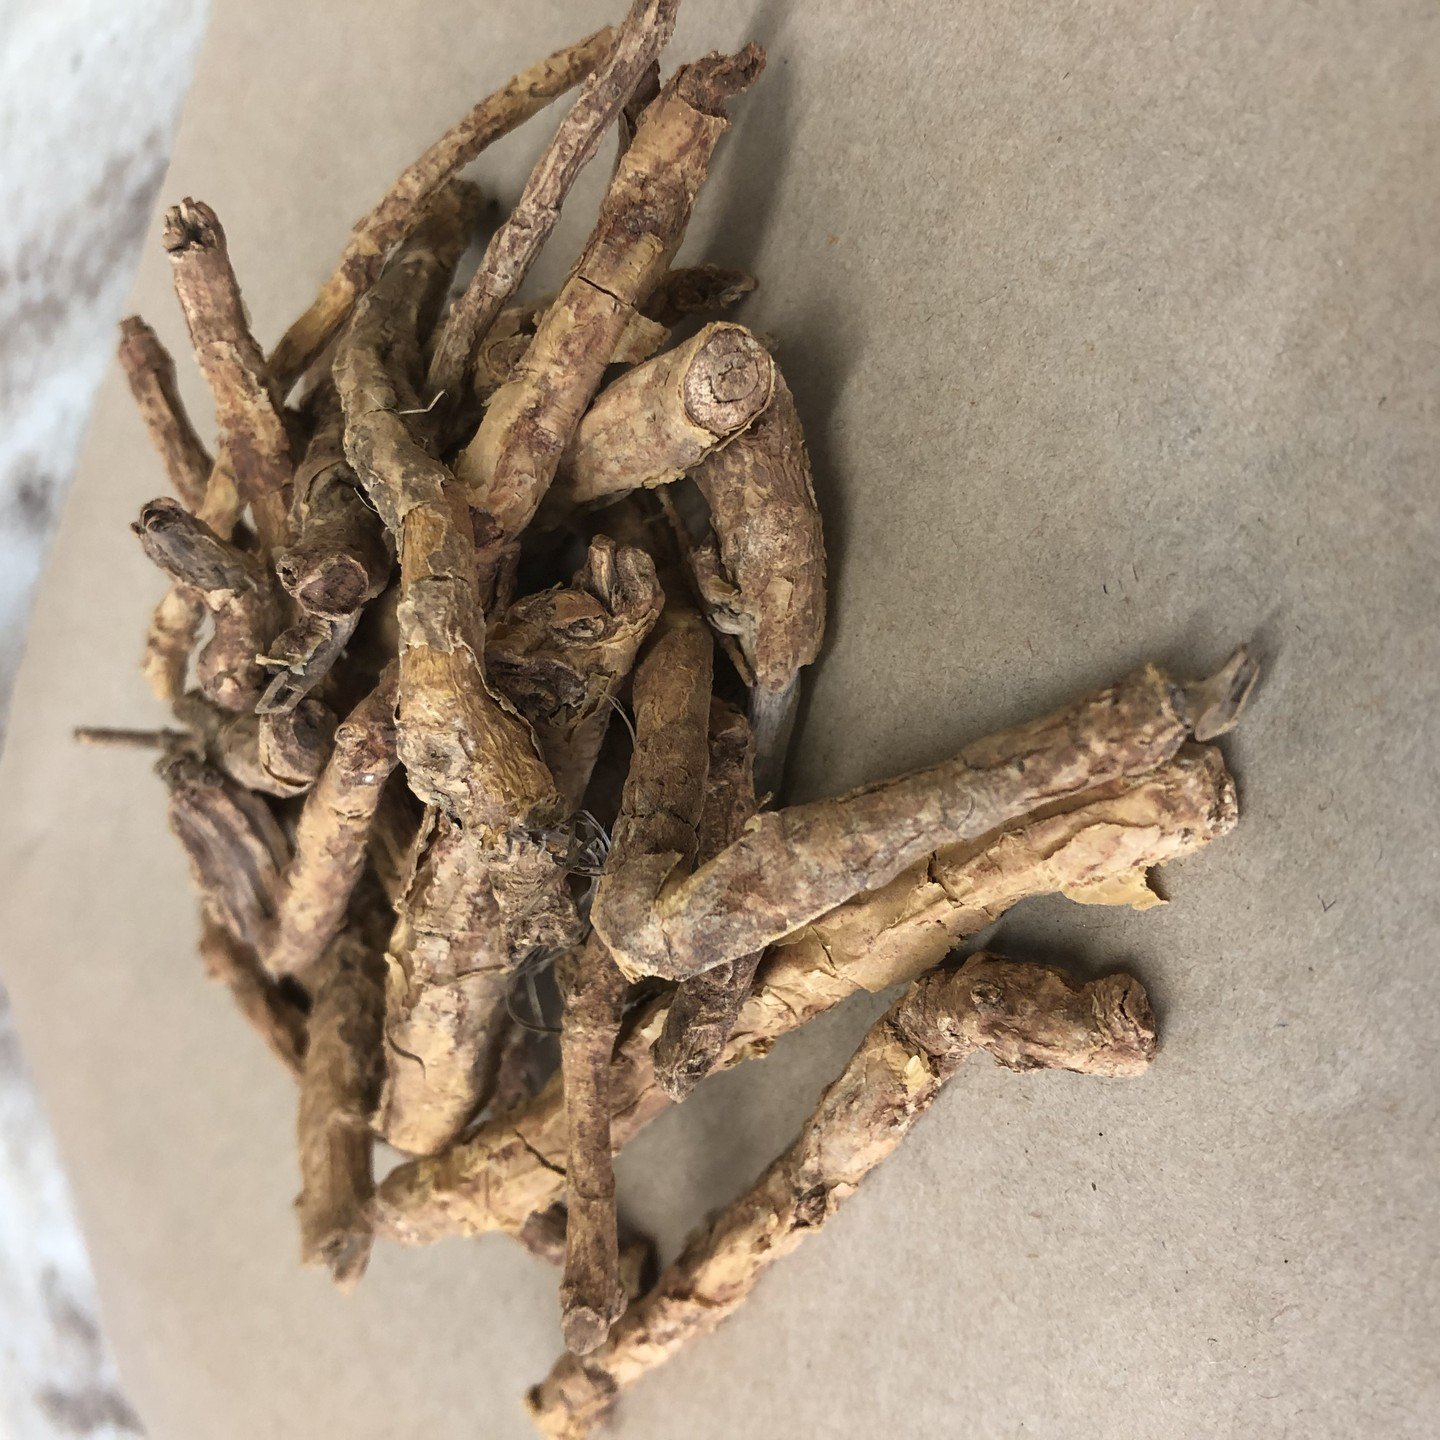 Scutellaria baicalensis is a cold and bitter herb that has anti-inflammatory and analgesic properties. It clears heat and resolves dampness in the case of painful swelling and injury.

One of 11 powerful medicinal grade herbs that provide the fantast